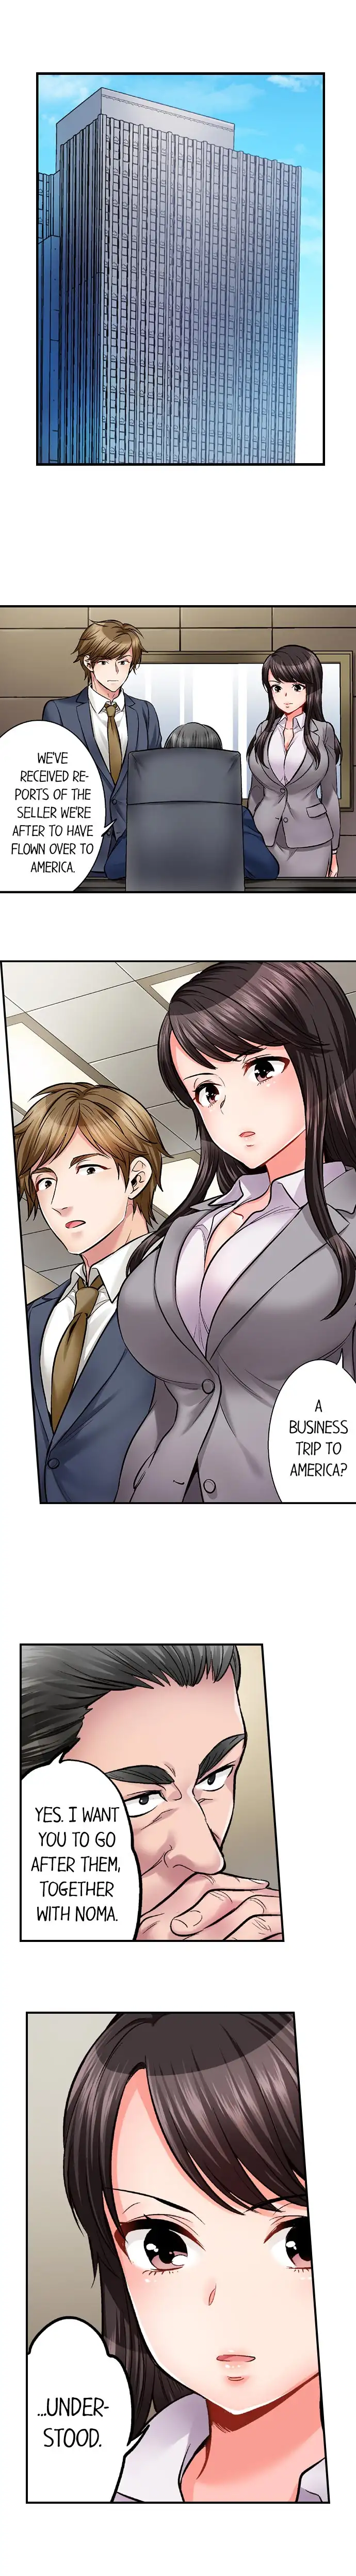 Sex is Part of Undercover Agent’s Job? - Chapter 19 Page 2